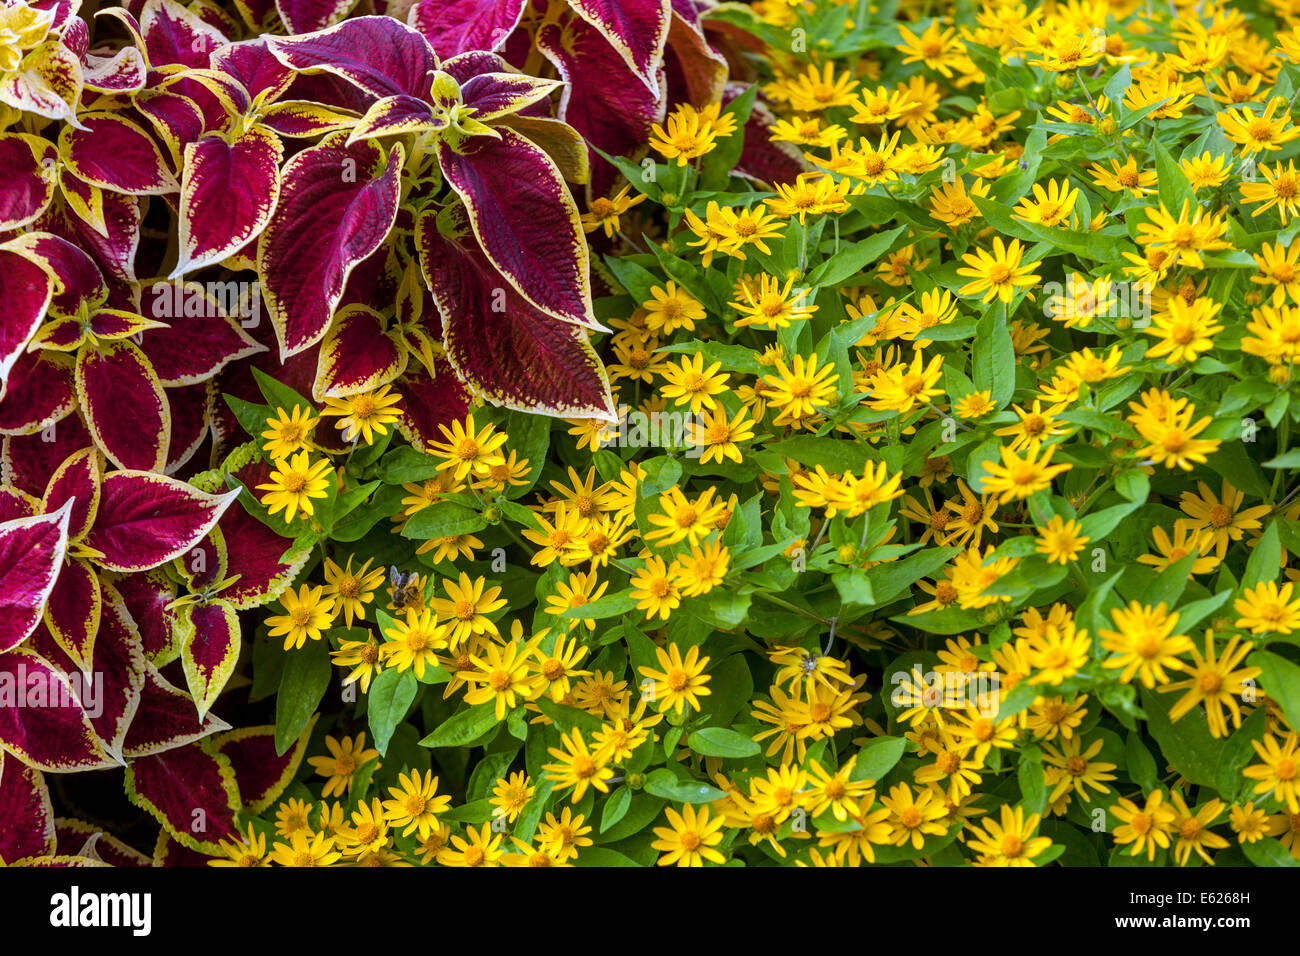 Colorful flower bed of annual flowers, Coleus 'Wizard scarlet', Melampodium paludosum Butter Daisy Hardy annuals mixed border Stock Photo